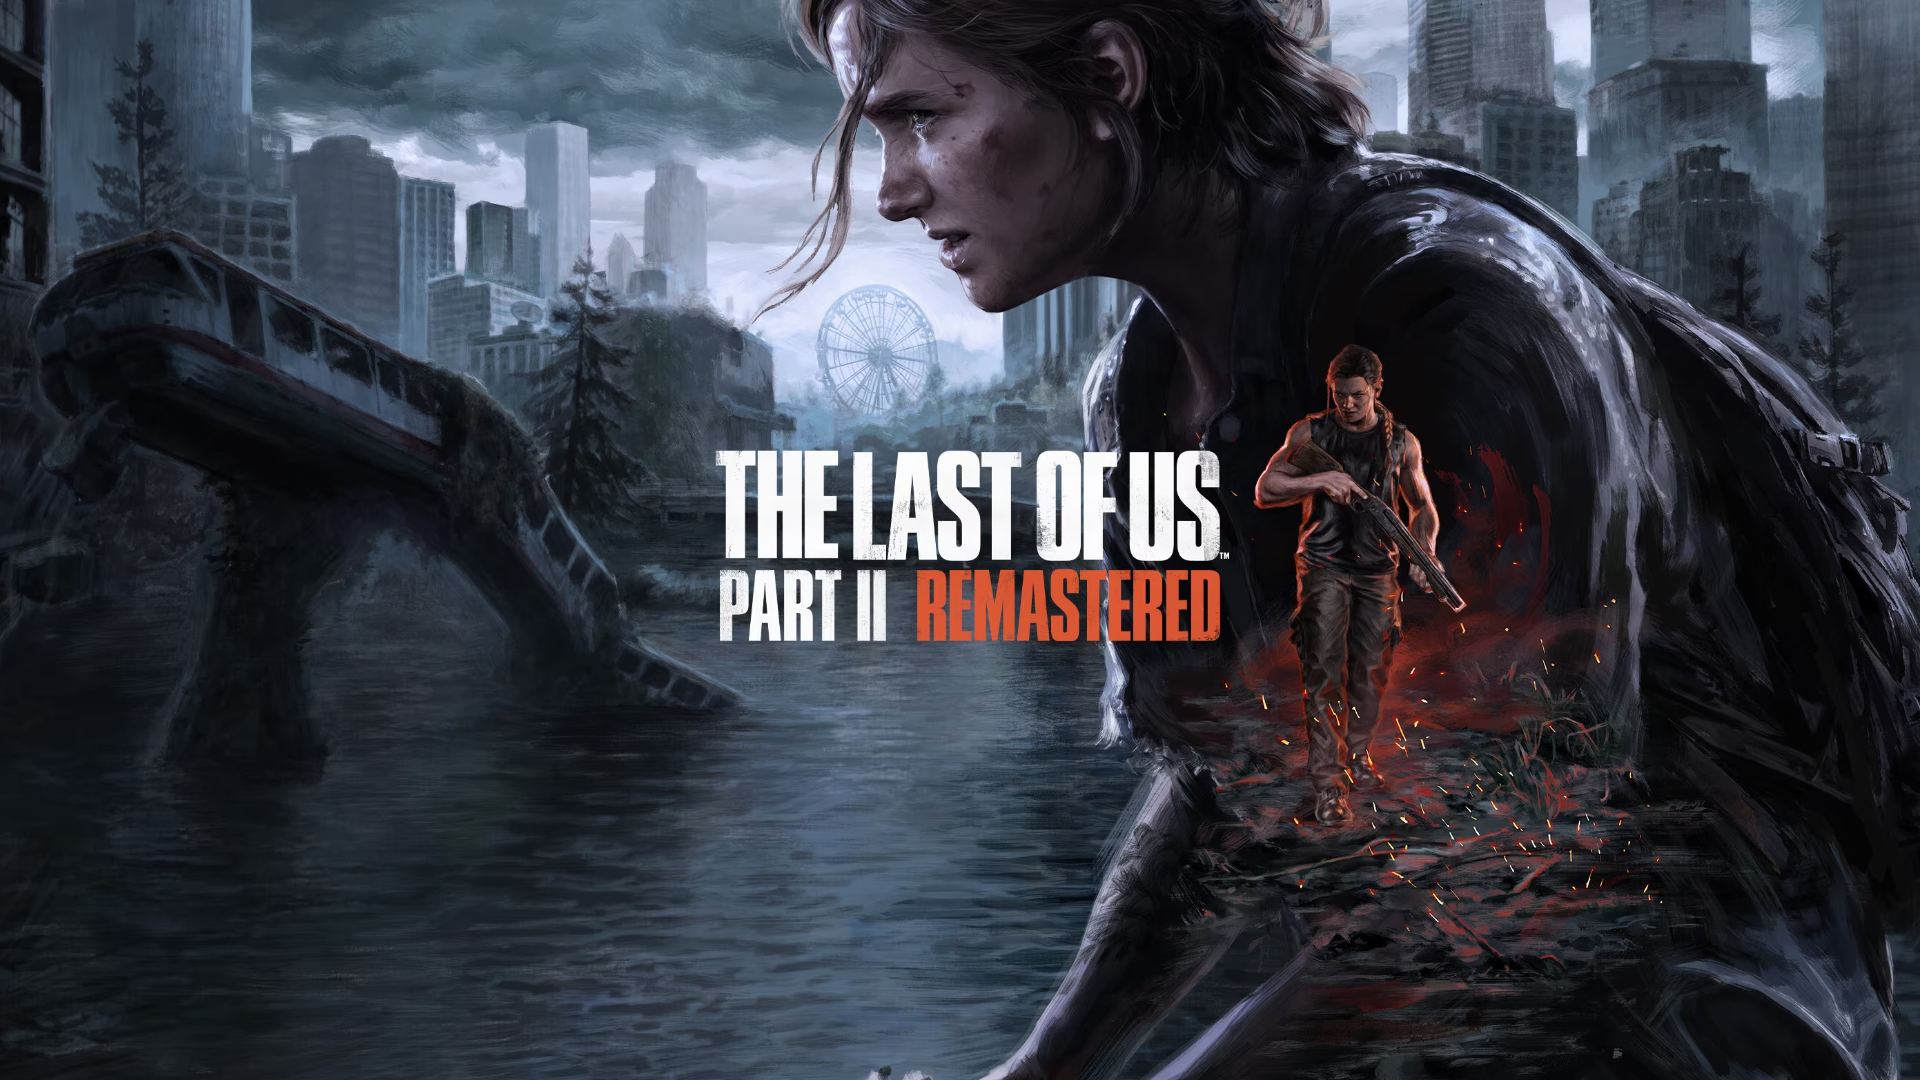 The Last of Us Part II Remastered: game modes, graphics our